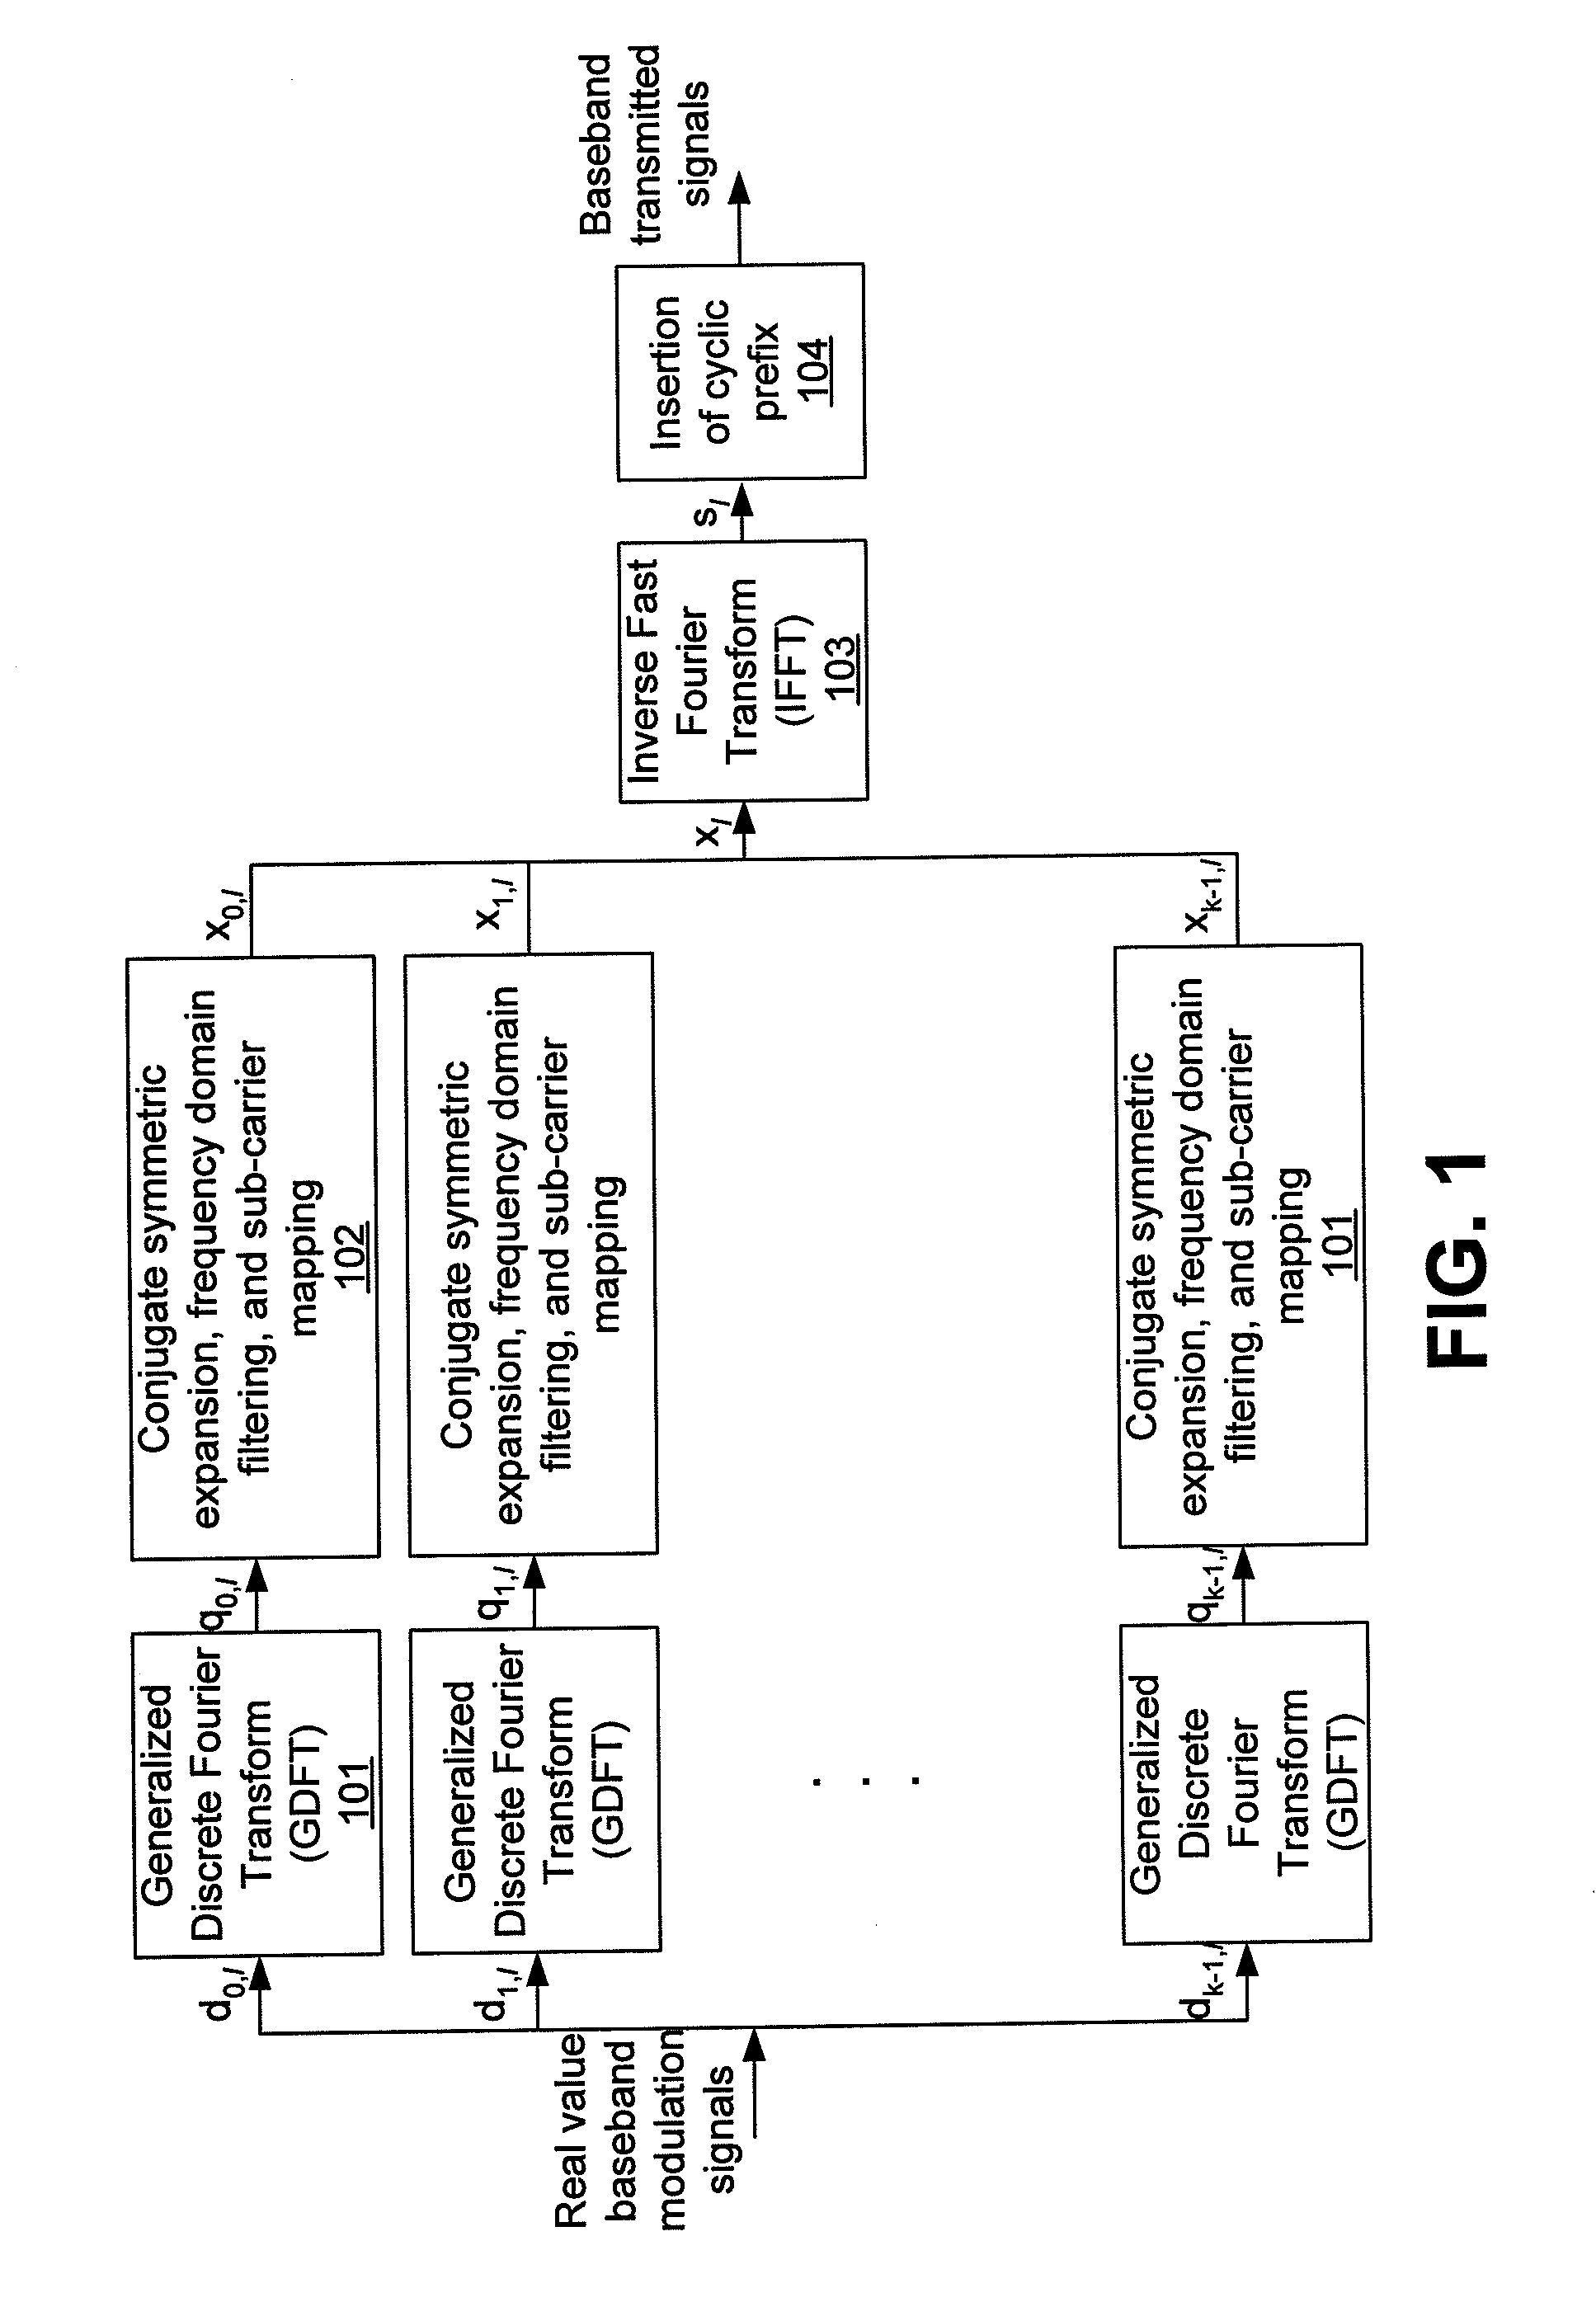 Offset modulation orthogonal frequency division multiplexing (OFDM) and multi-access transmission method with cyclic prefix (CP)